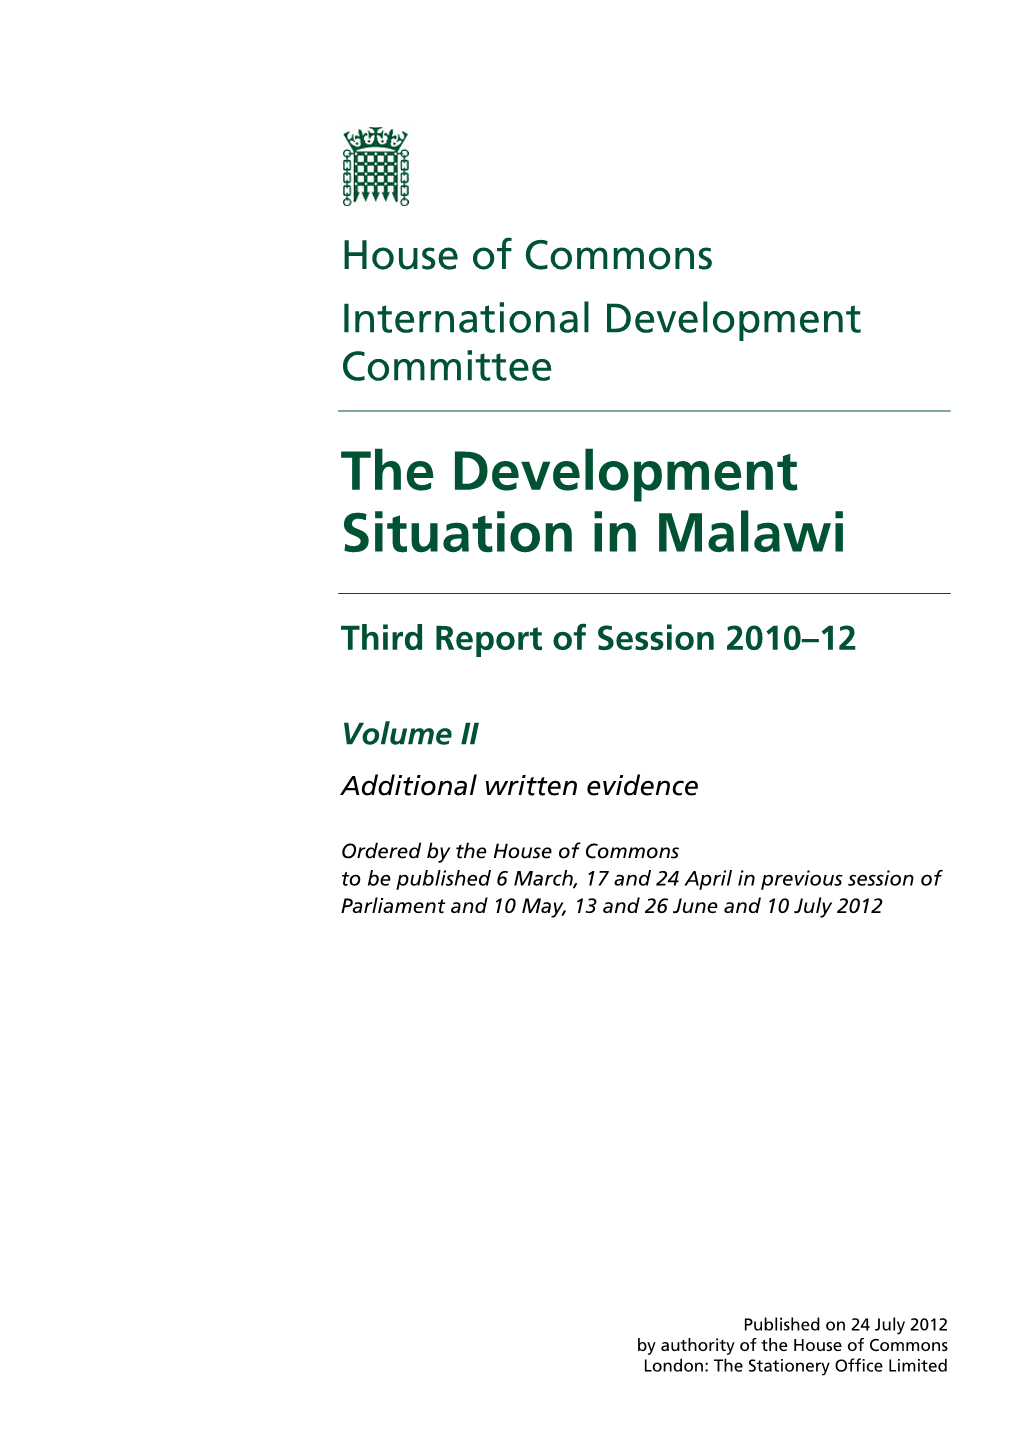 The Development Situation in Malawi